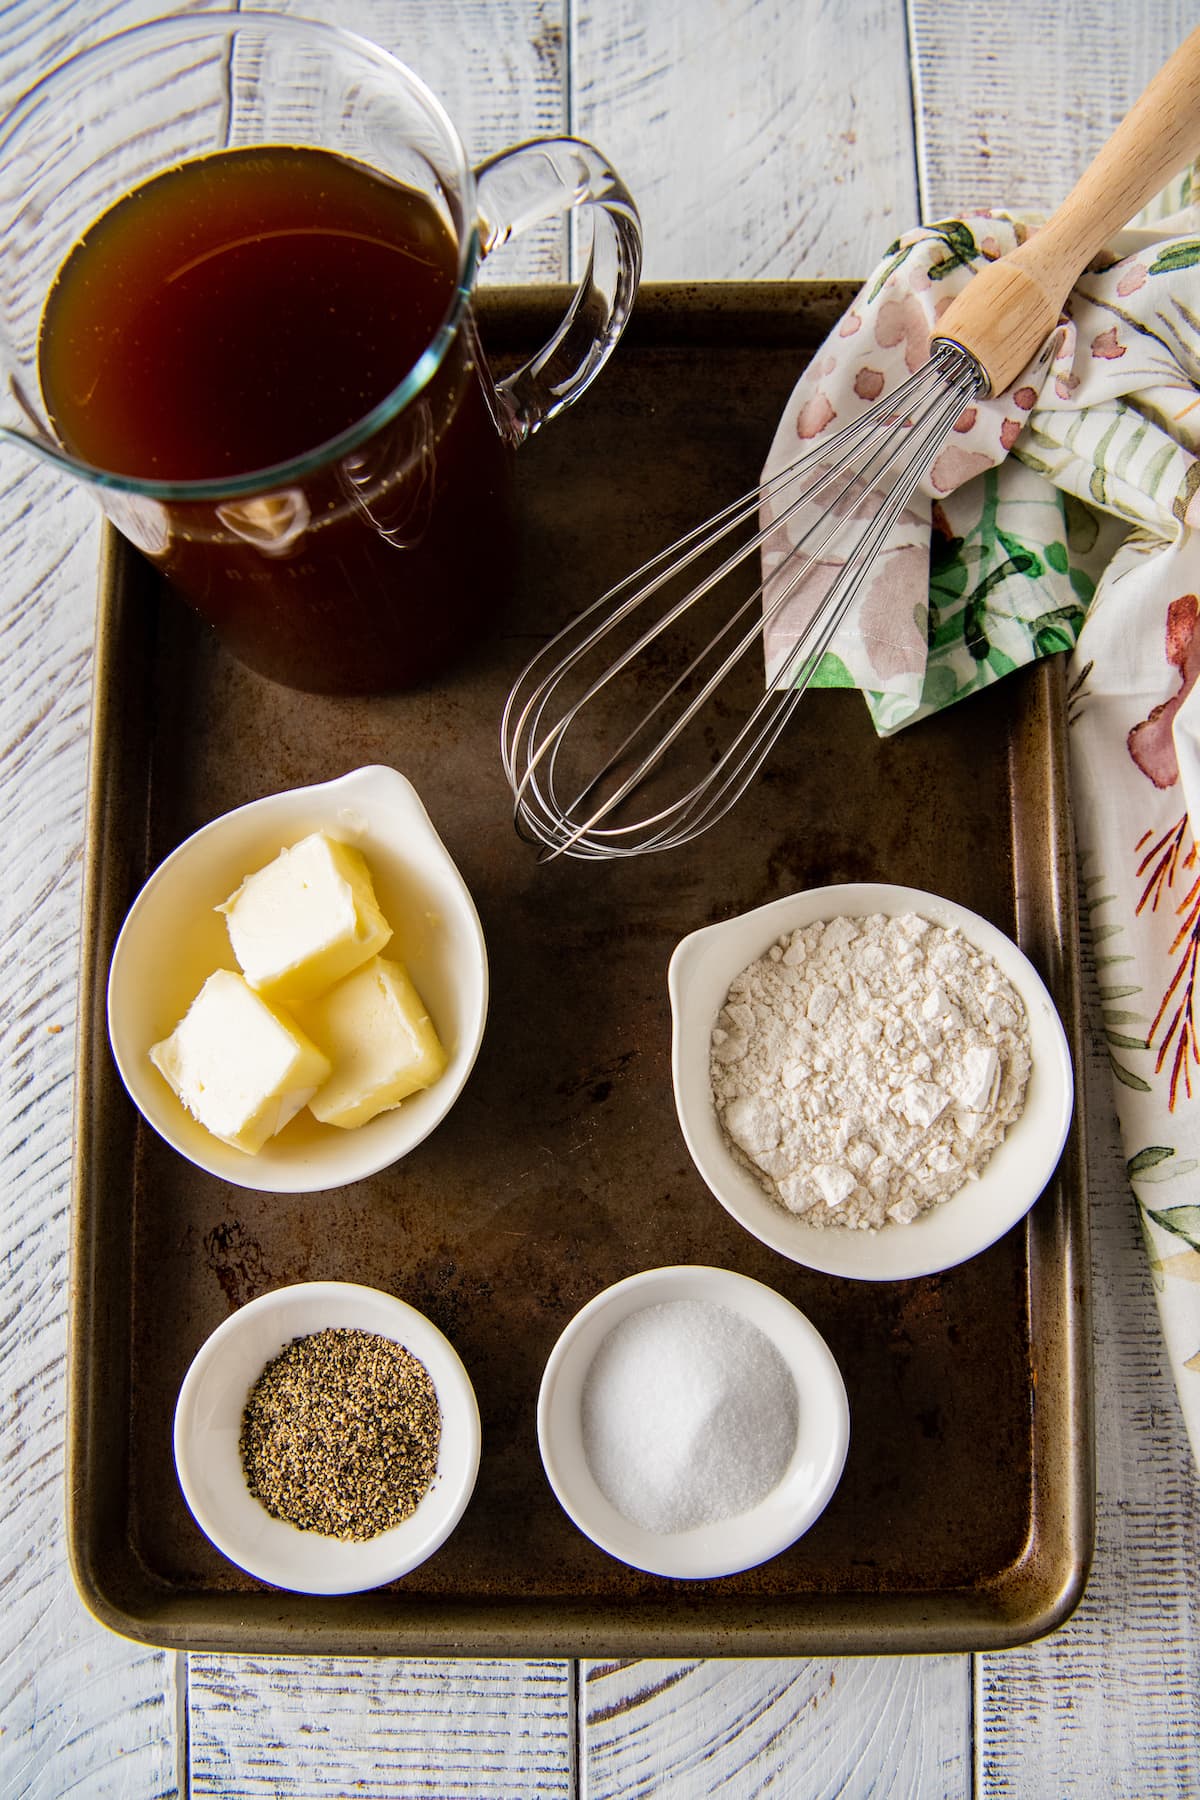 ingredients to make homemade brown gravy on a sheet tray in small prep bowls including butter, flour, salt, and pepper. plus a measuring cup with beef stock.